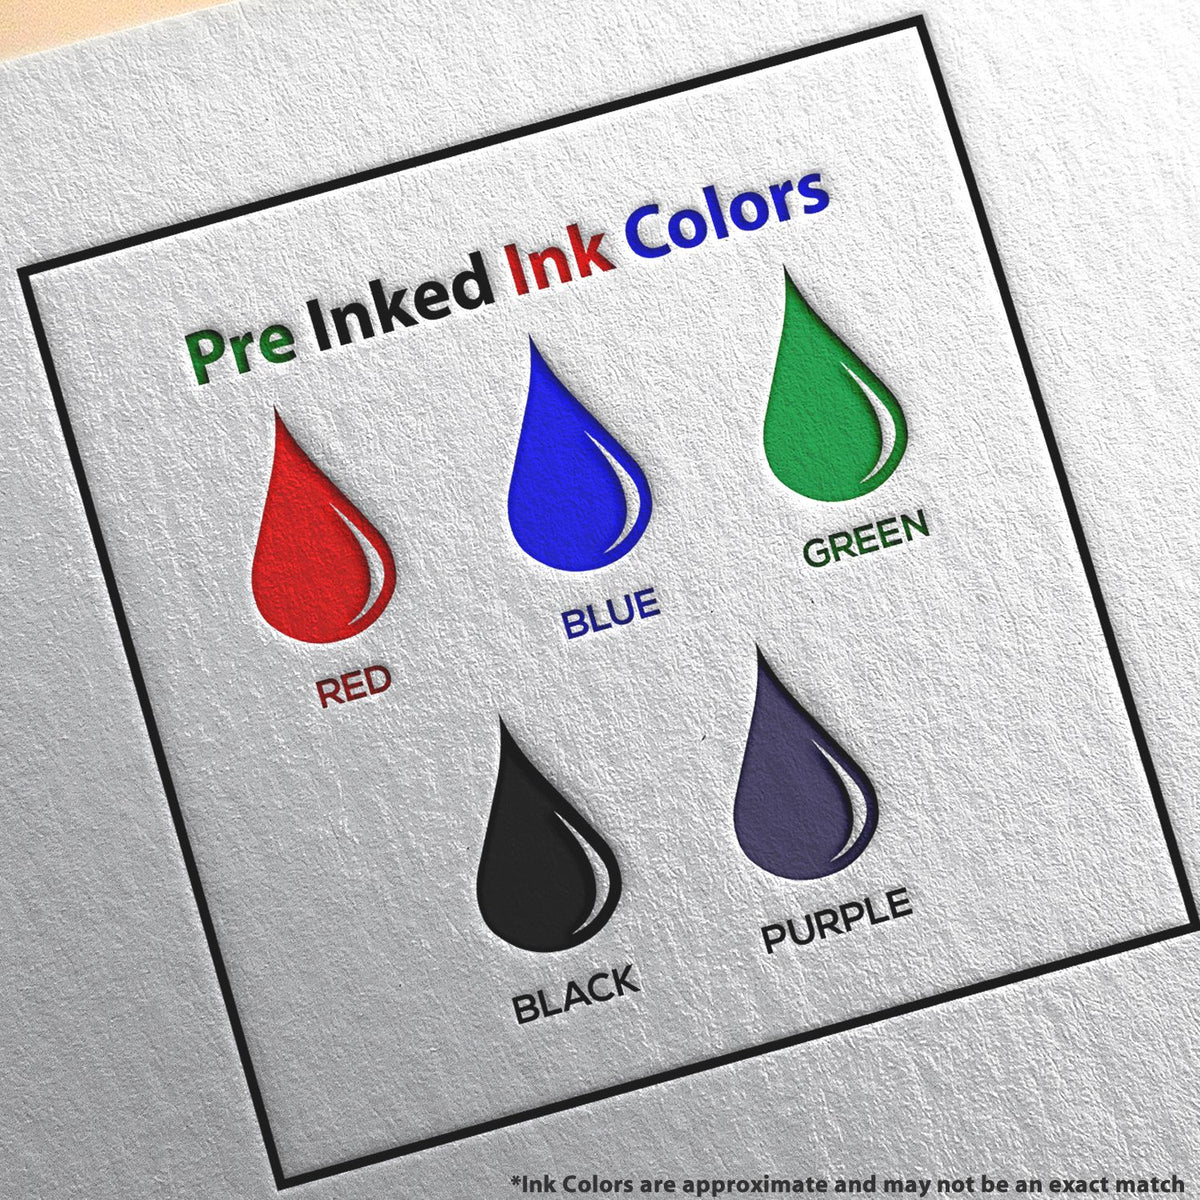 A picture showing the different ink colors or hues available for the Slim Pre-Inked Arkansas Land Surveyor Seal Stamp product.